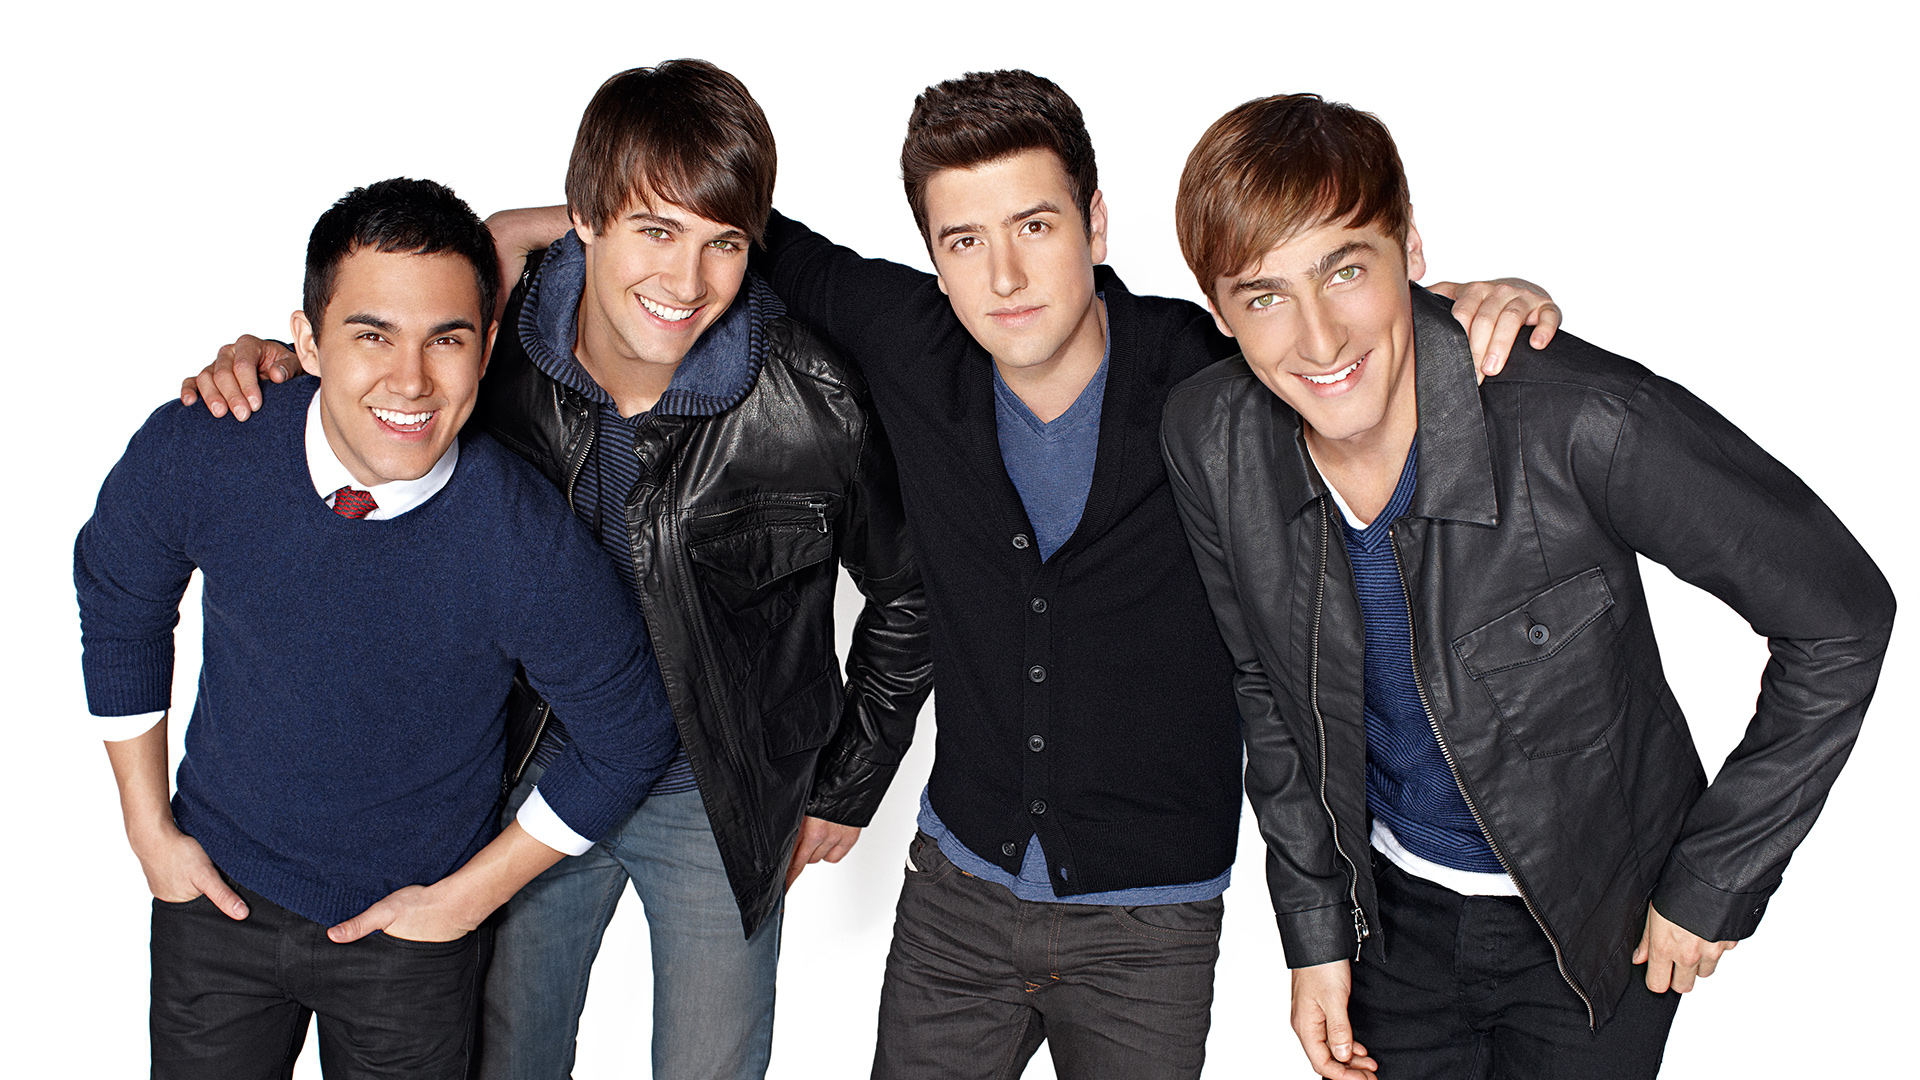 guys from big time rush now